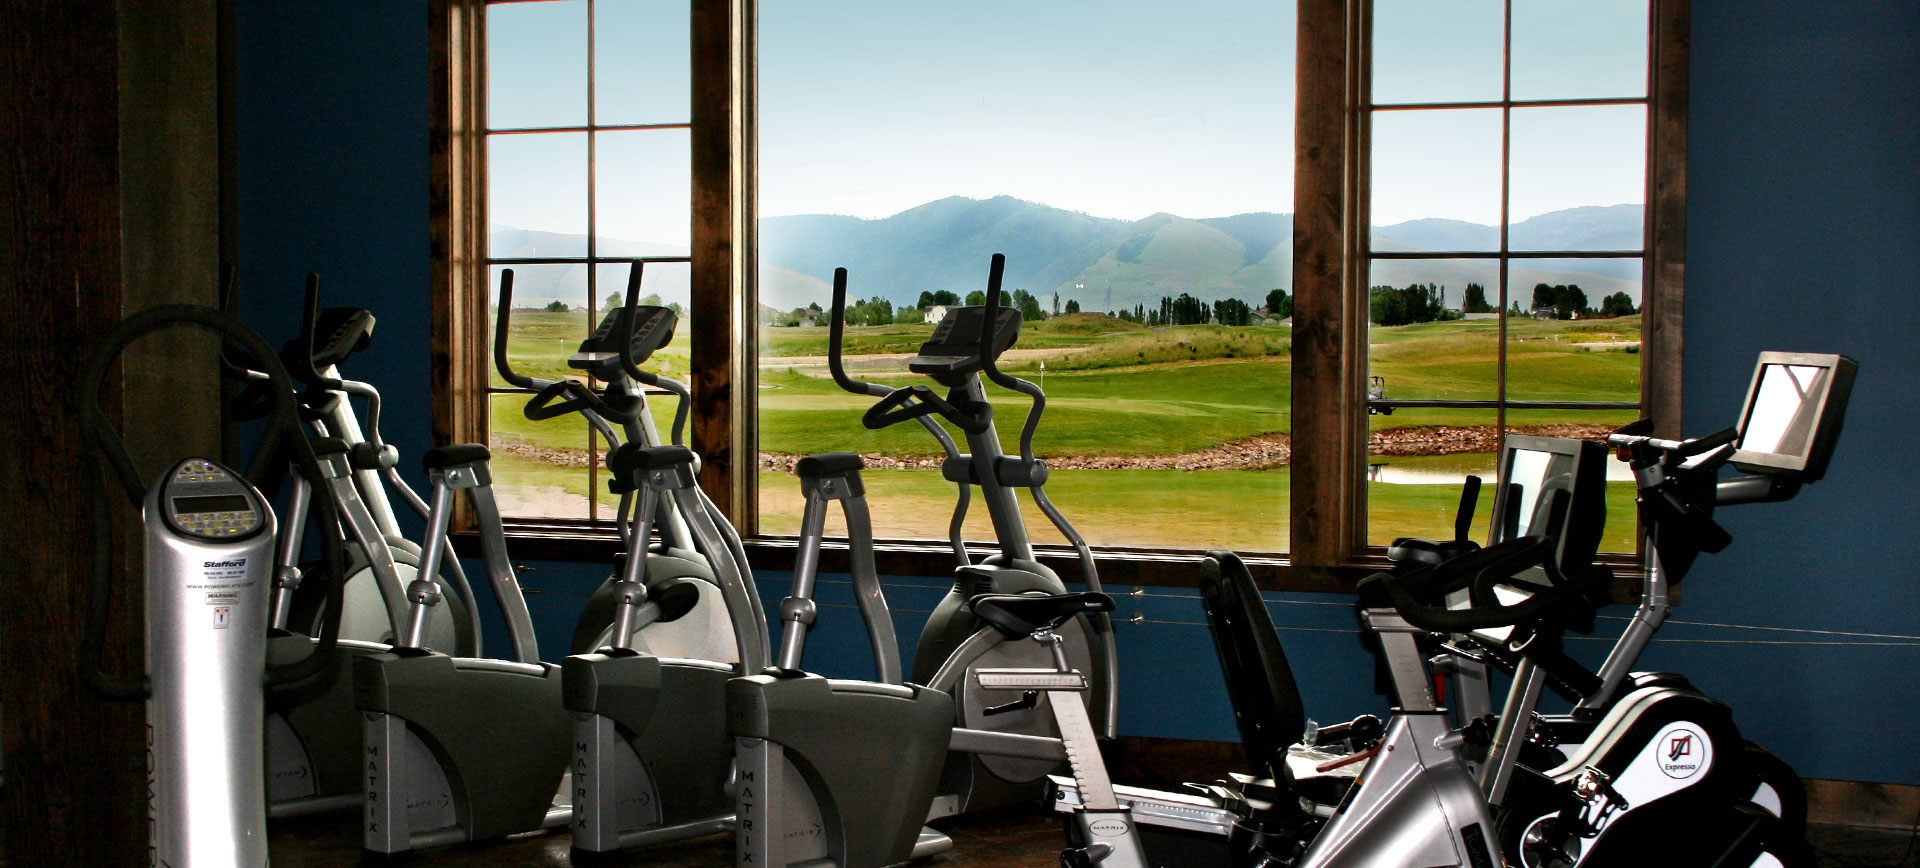 The Ranch Club Missoula, MT fitness center